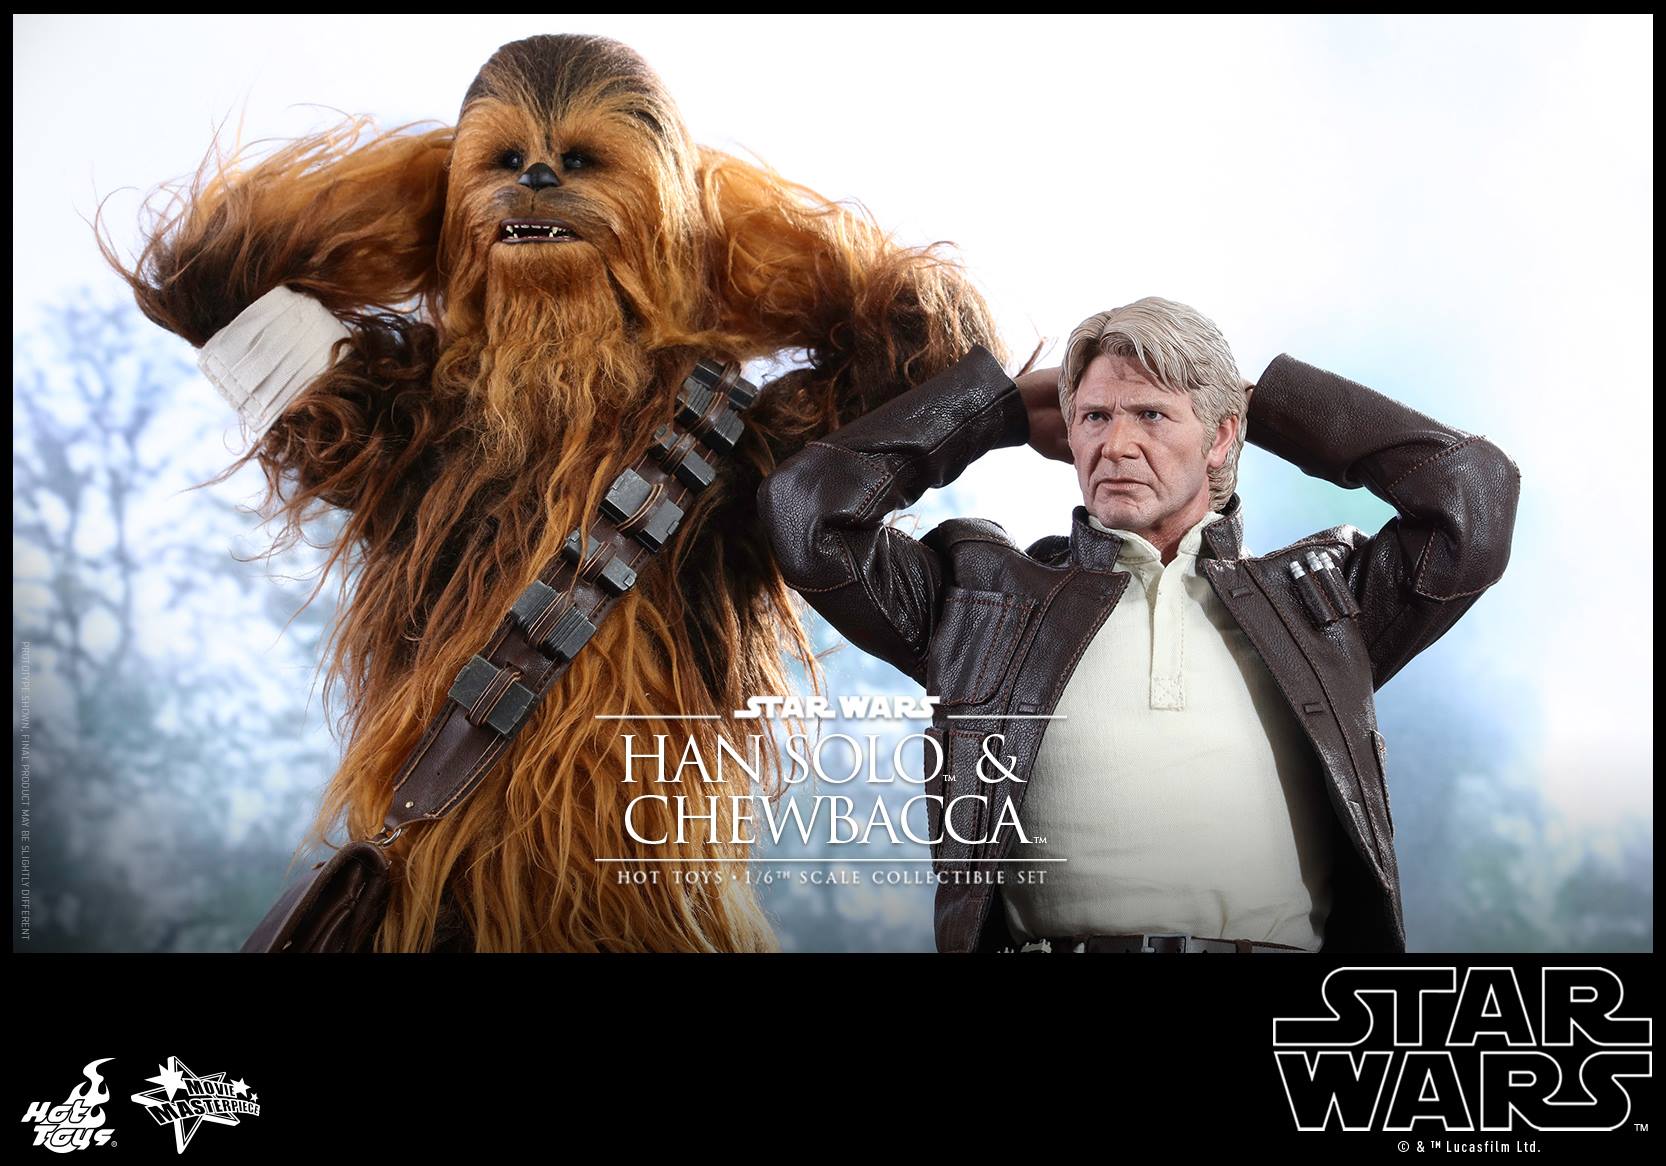 Star-Wars-The-Force-Awakens-Hot-Toys-Han-Solo-and-Chewbacca-004